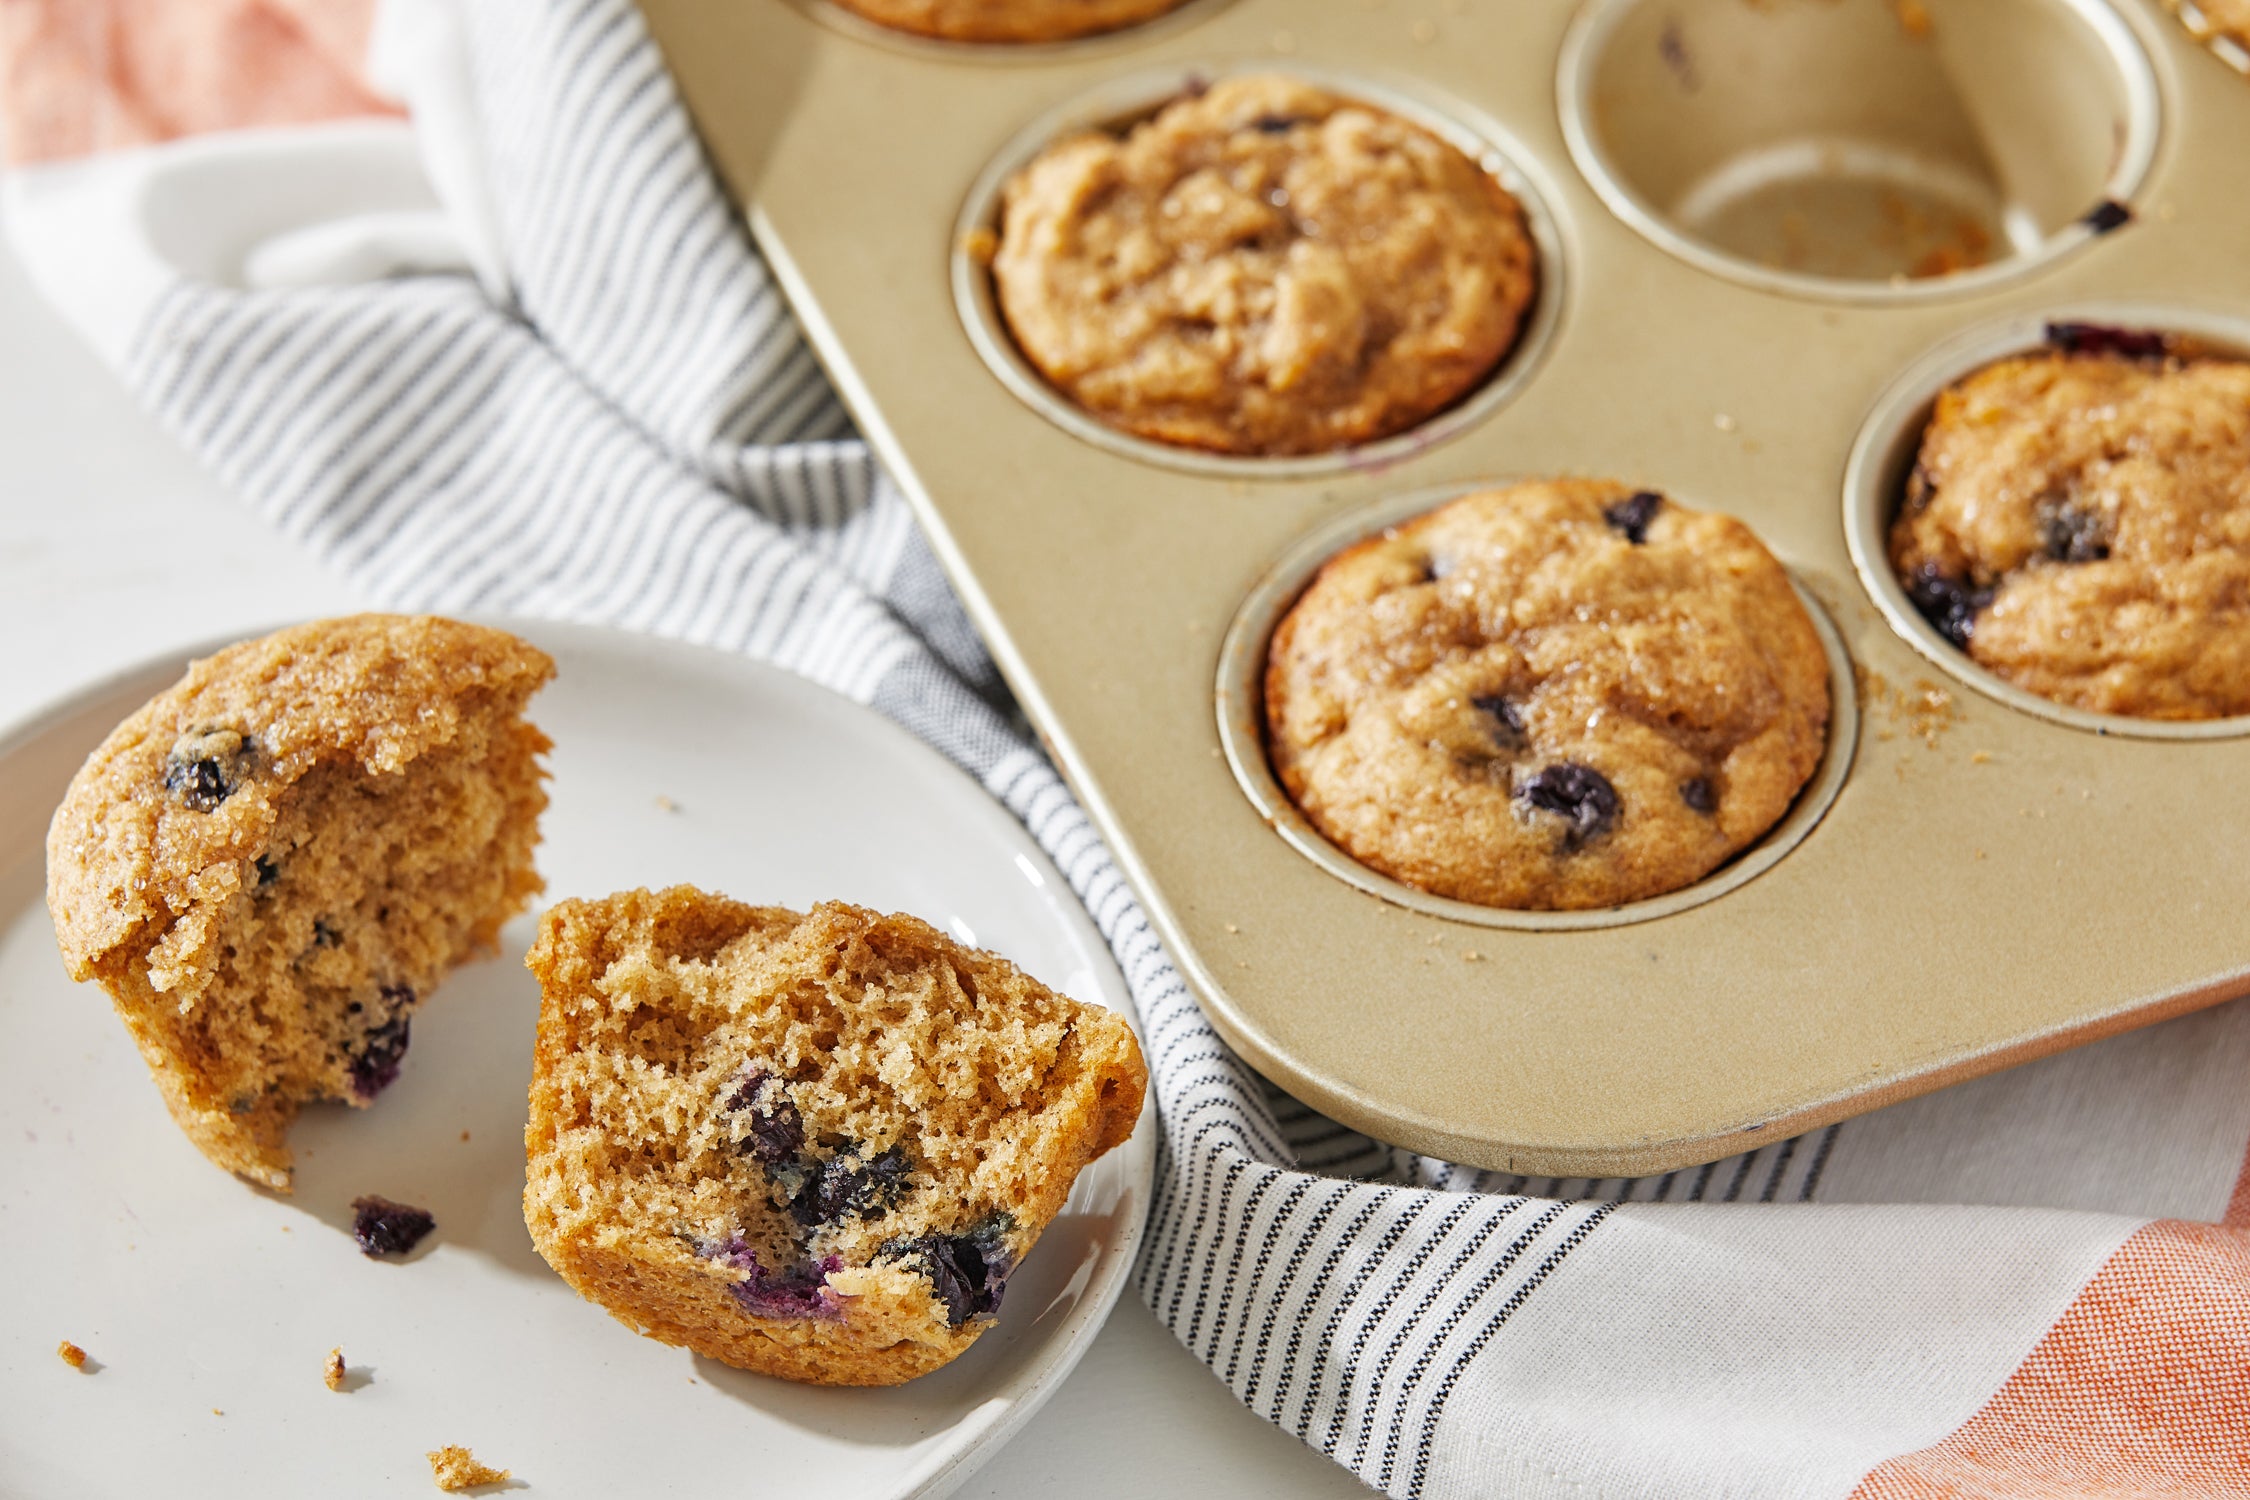 Clever swaps keep the flavour in this simple healthy muffin recipe